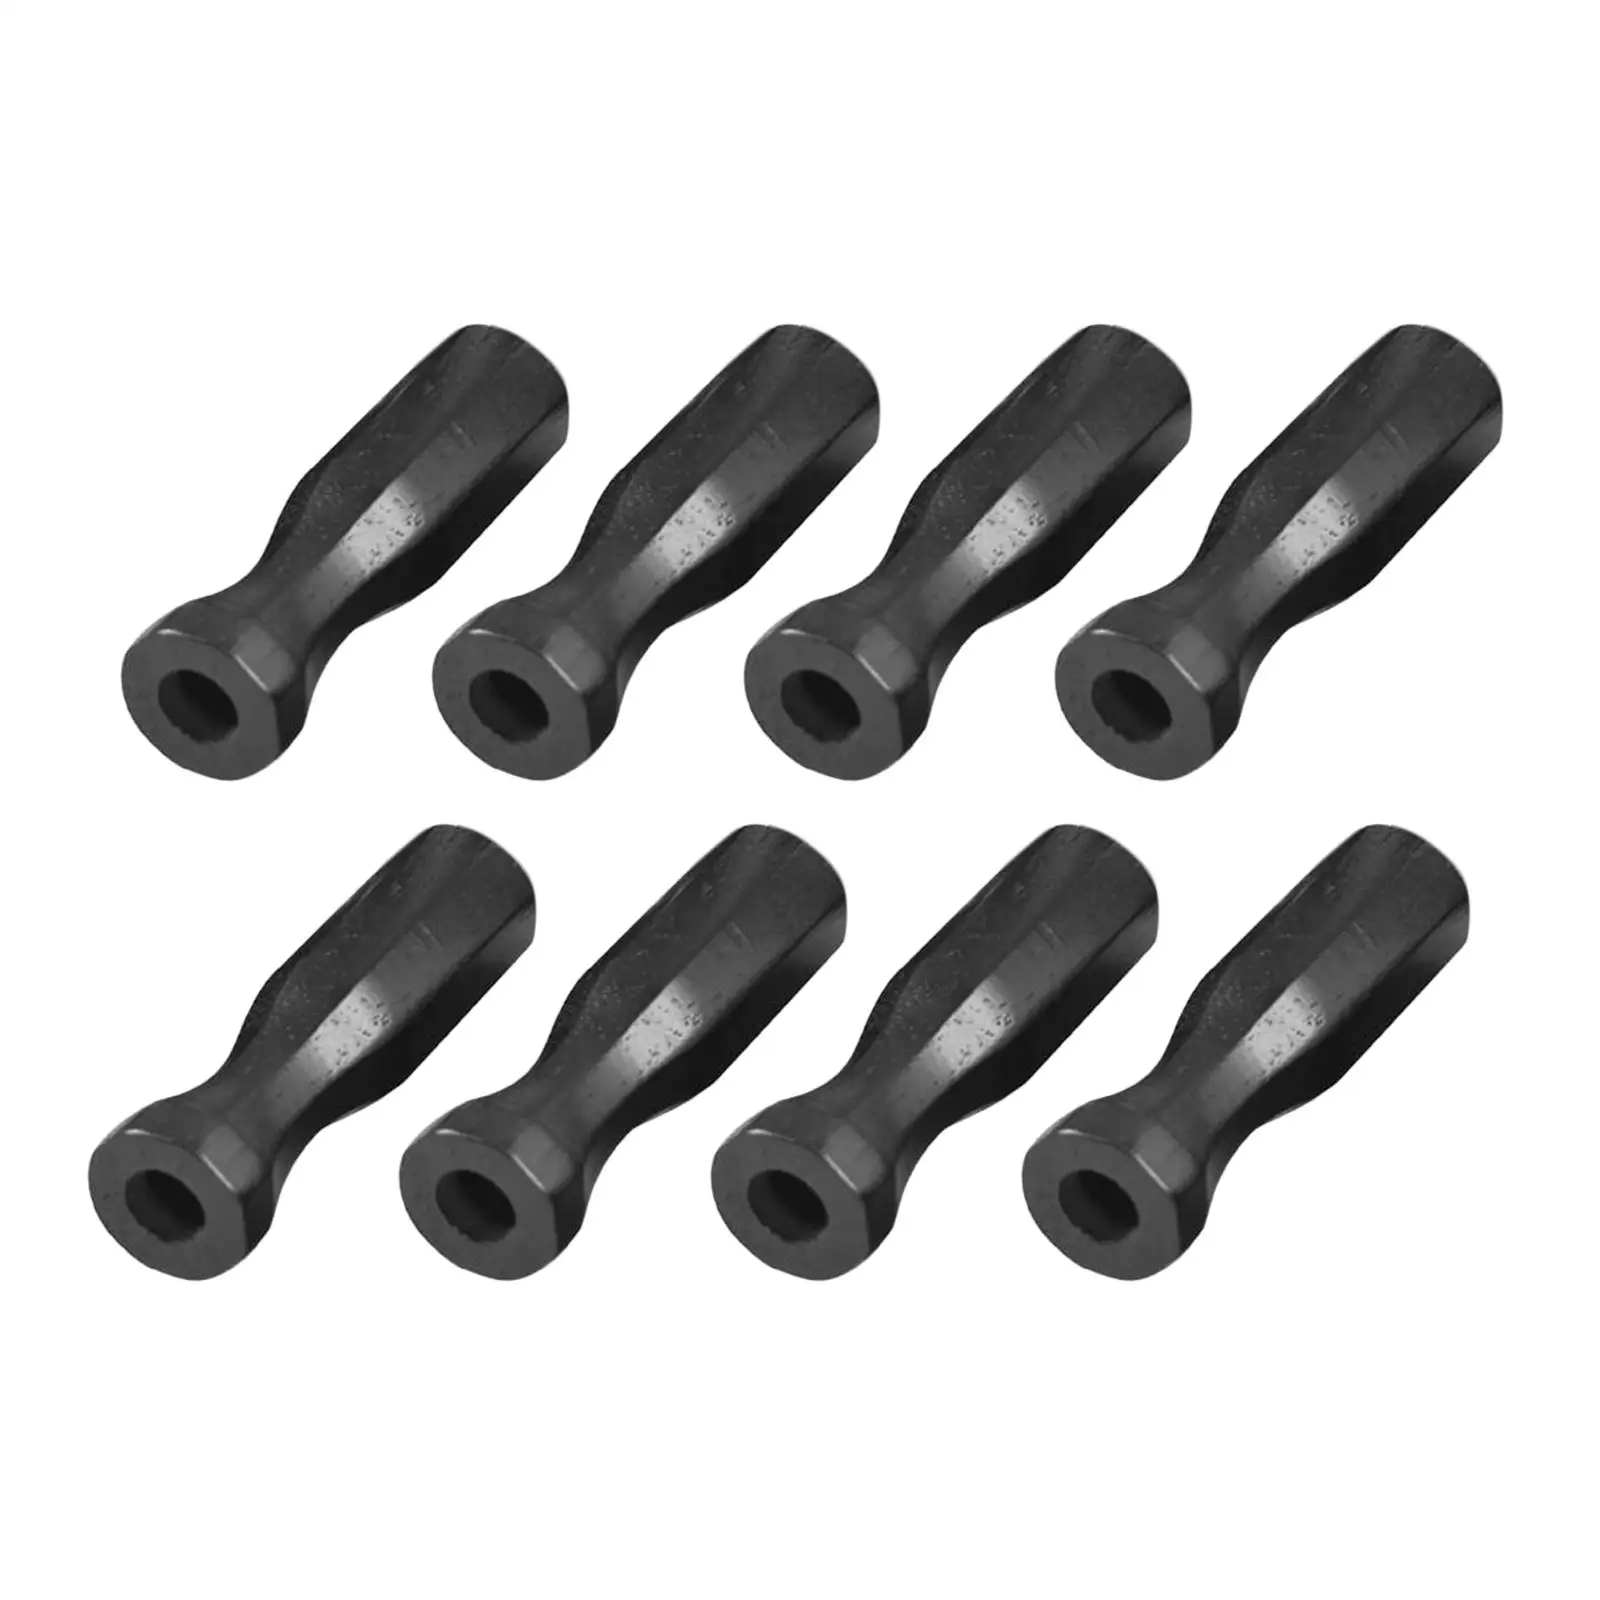 8Pcs Soccer Table Handles Durable Lightweight Foosball Handle Grip for Game Child Indoor Soccer Machine Standard Foosball Tables